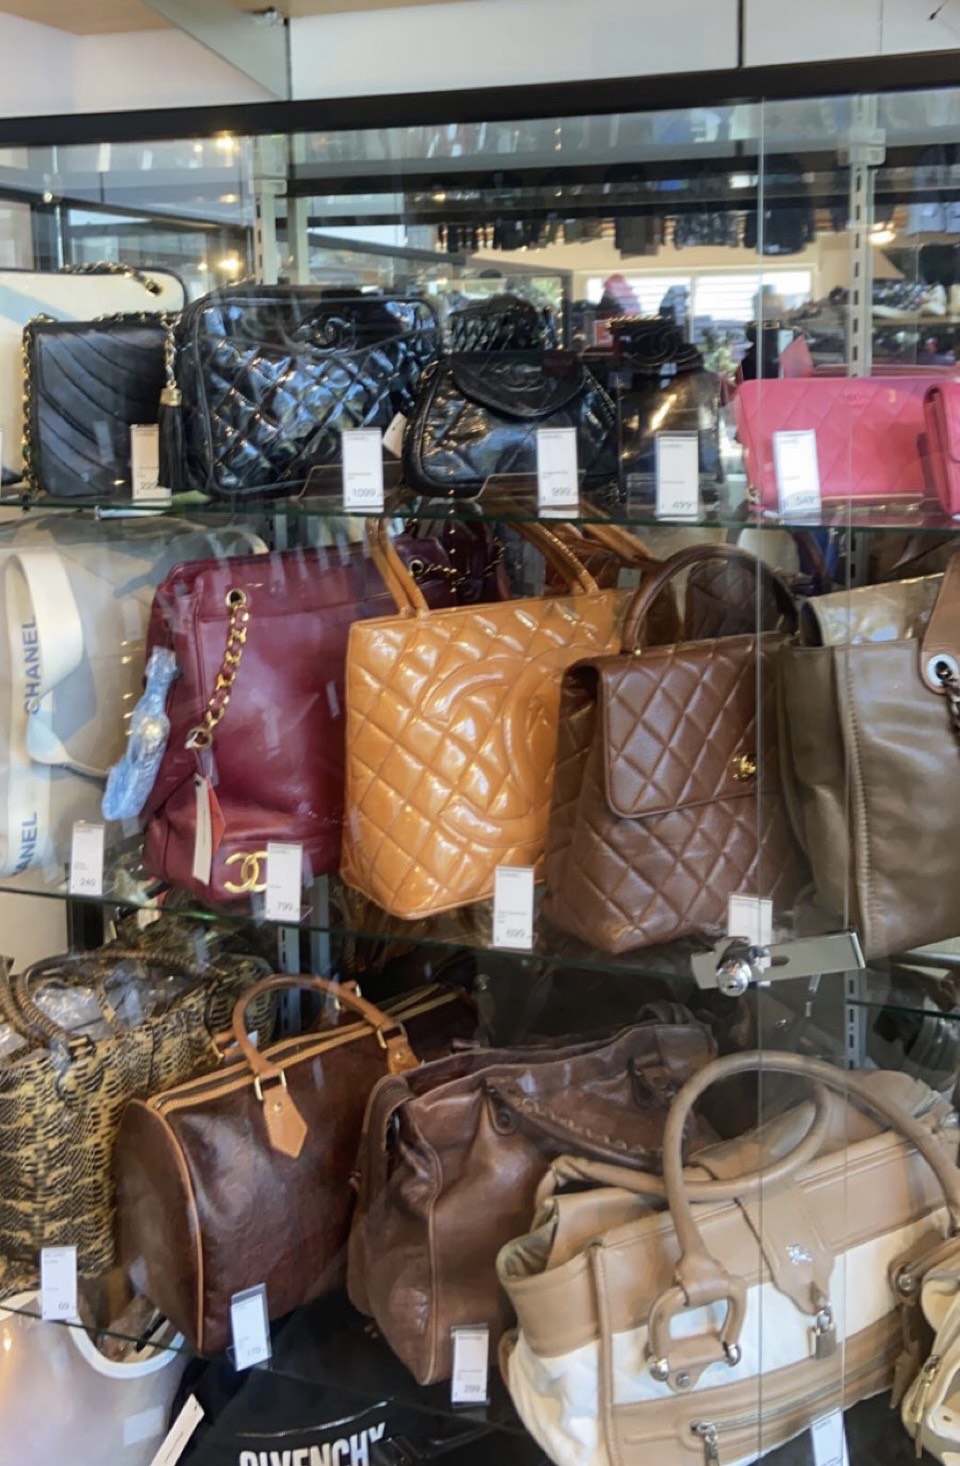 Buy, Sell & Consign Used Designer Handbags - Consigned Designs